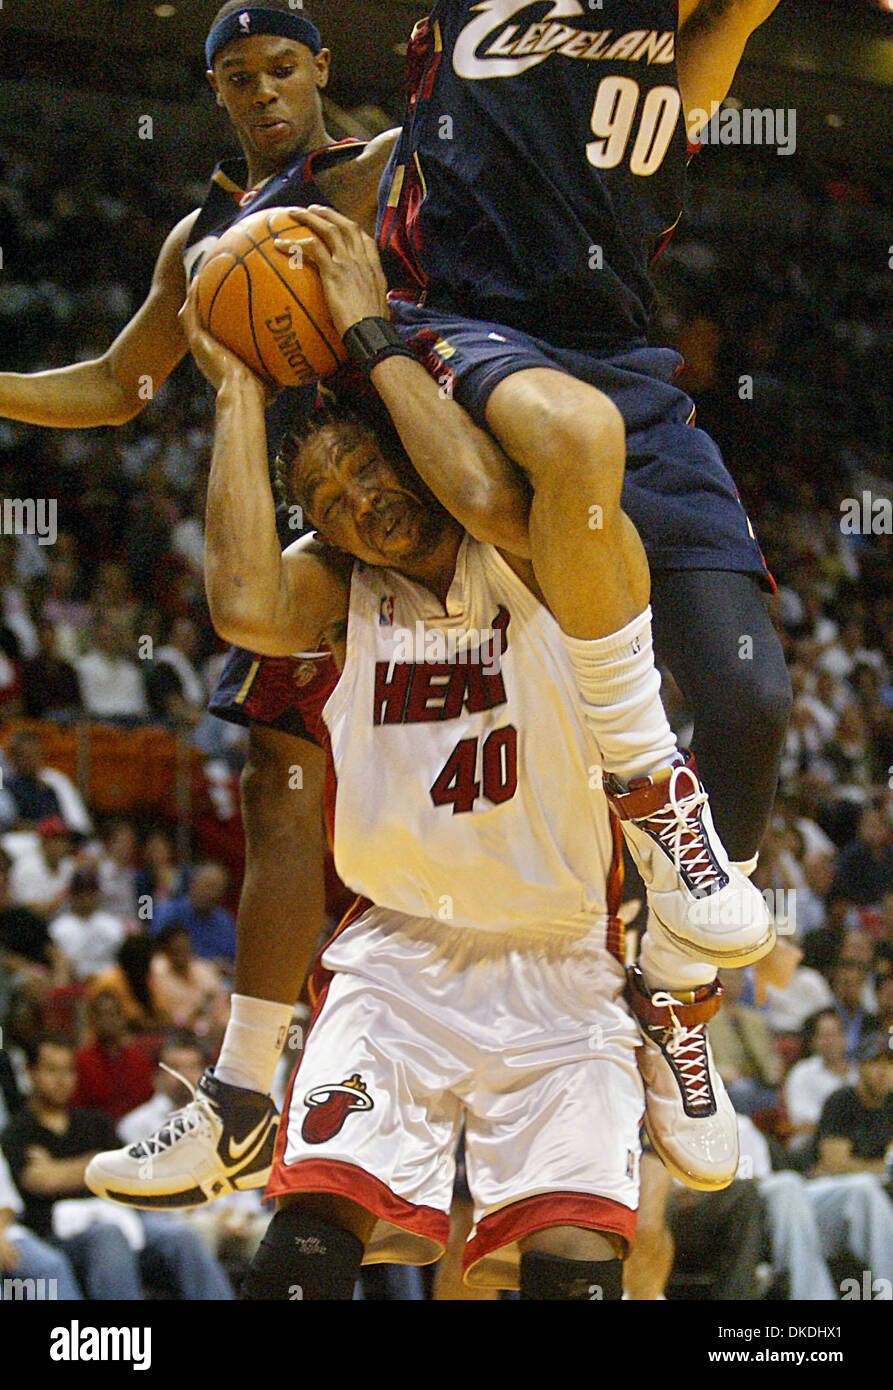 Jason Williams and Udonis Haslem of the Miami Heat pose for a